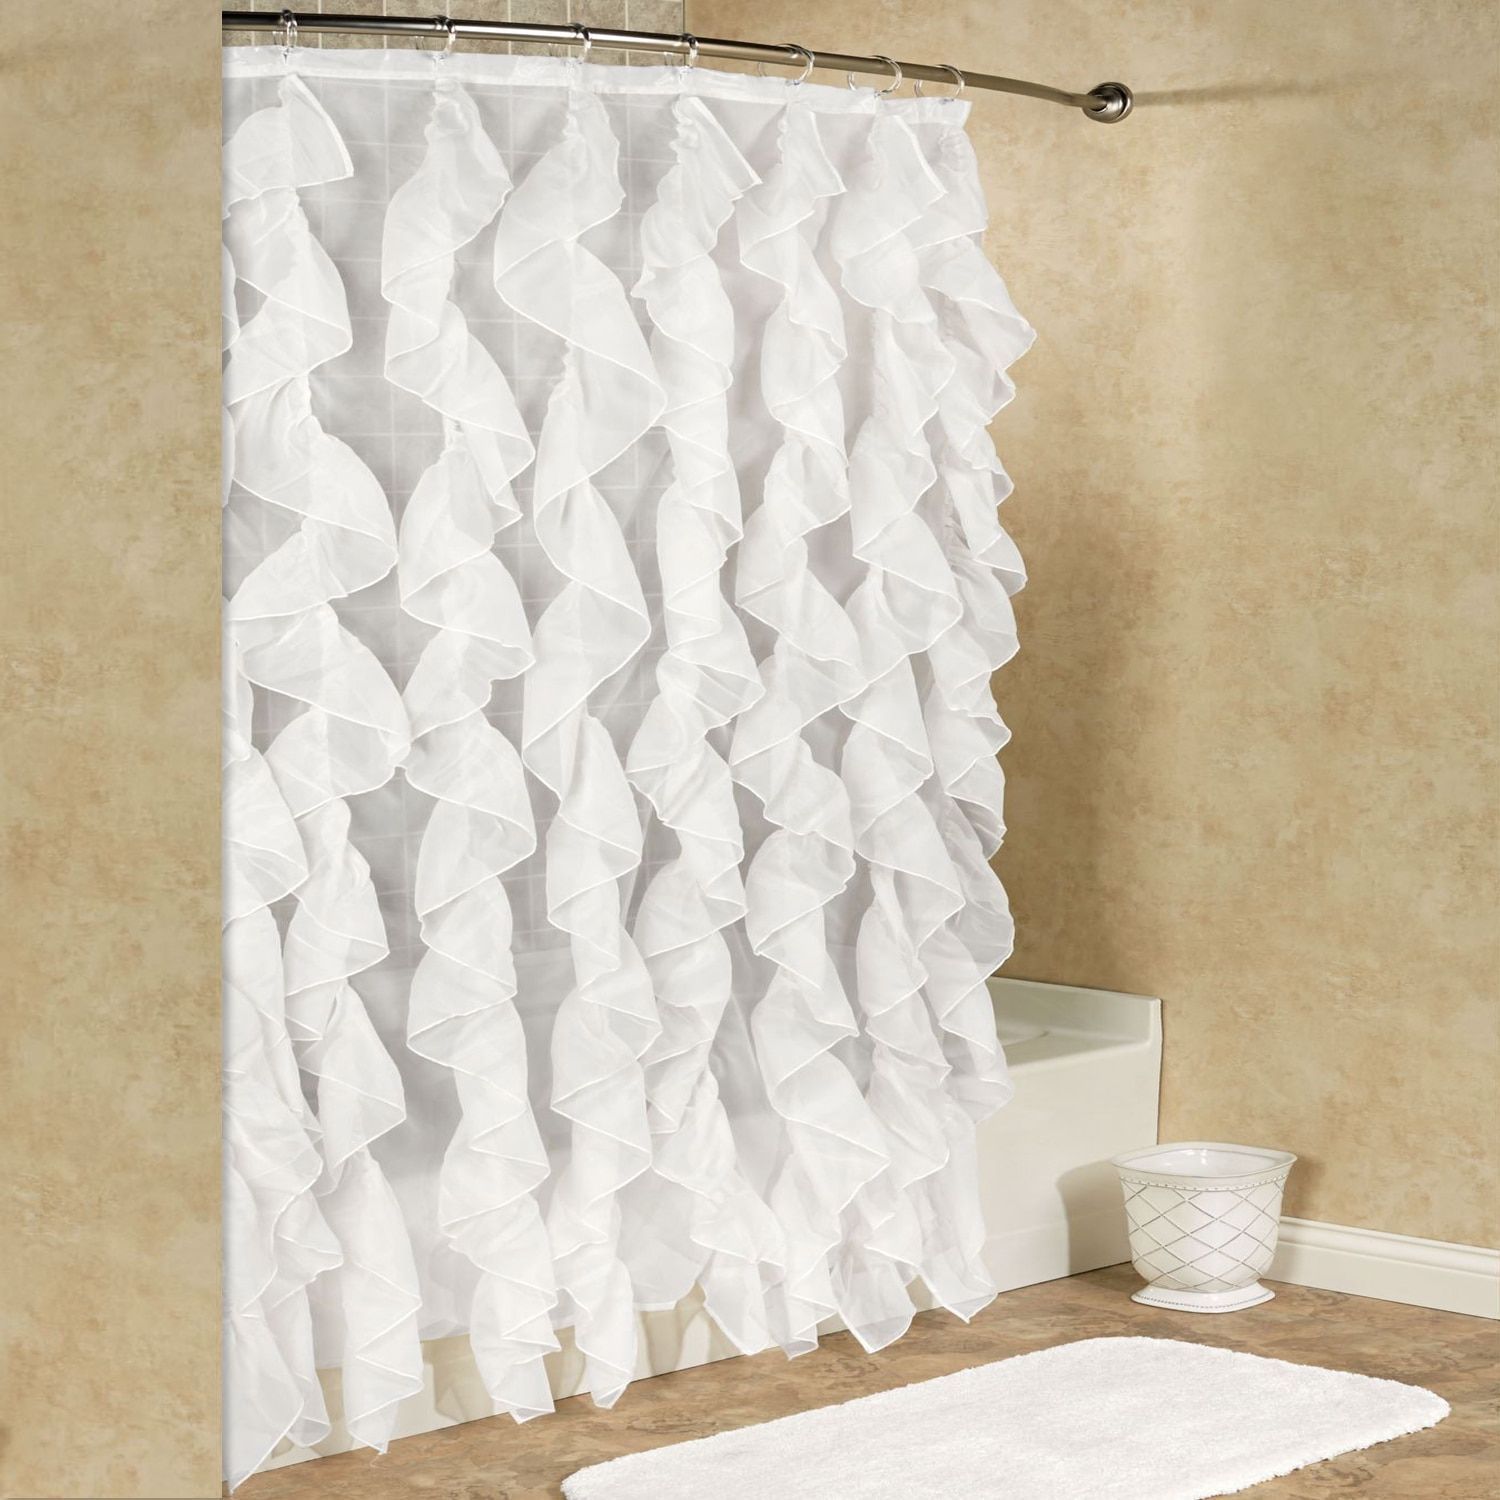 Chic Sheer Voile Vertical Waterfall Ruffled Shower Curtain Pertaining To Vertical Ruffled Waterfall Valances And Curtain Tiers (Photo 19 of 20)